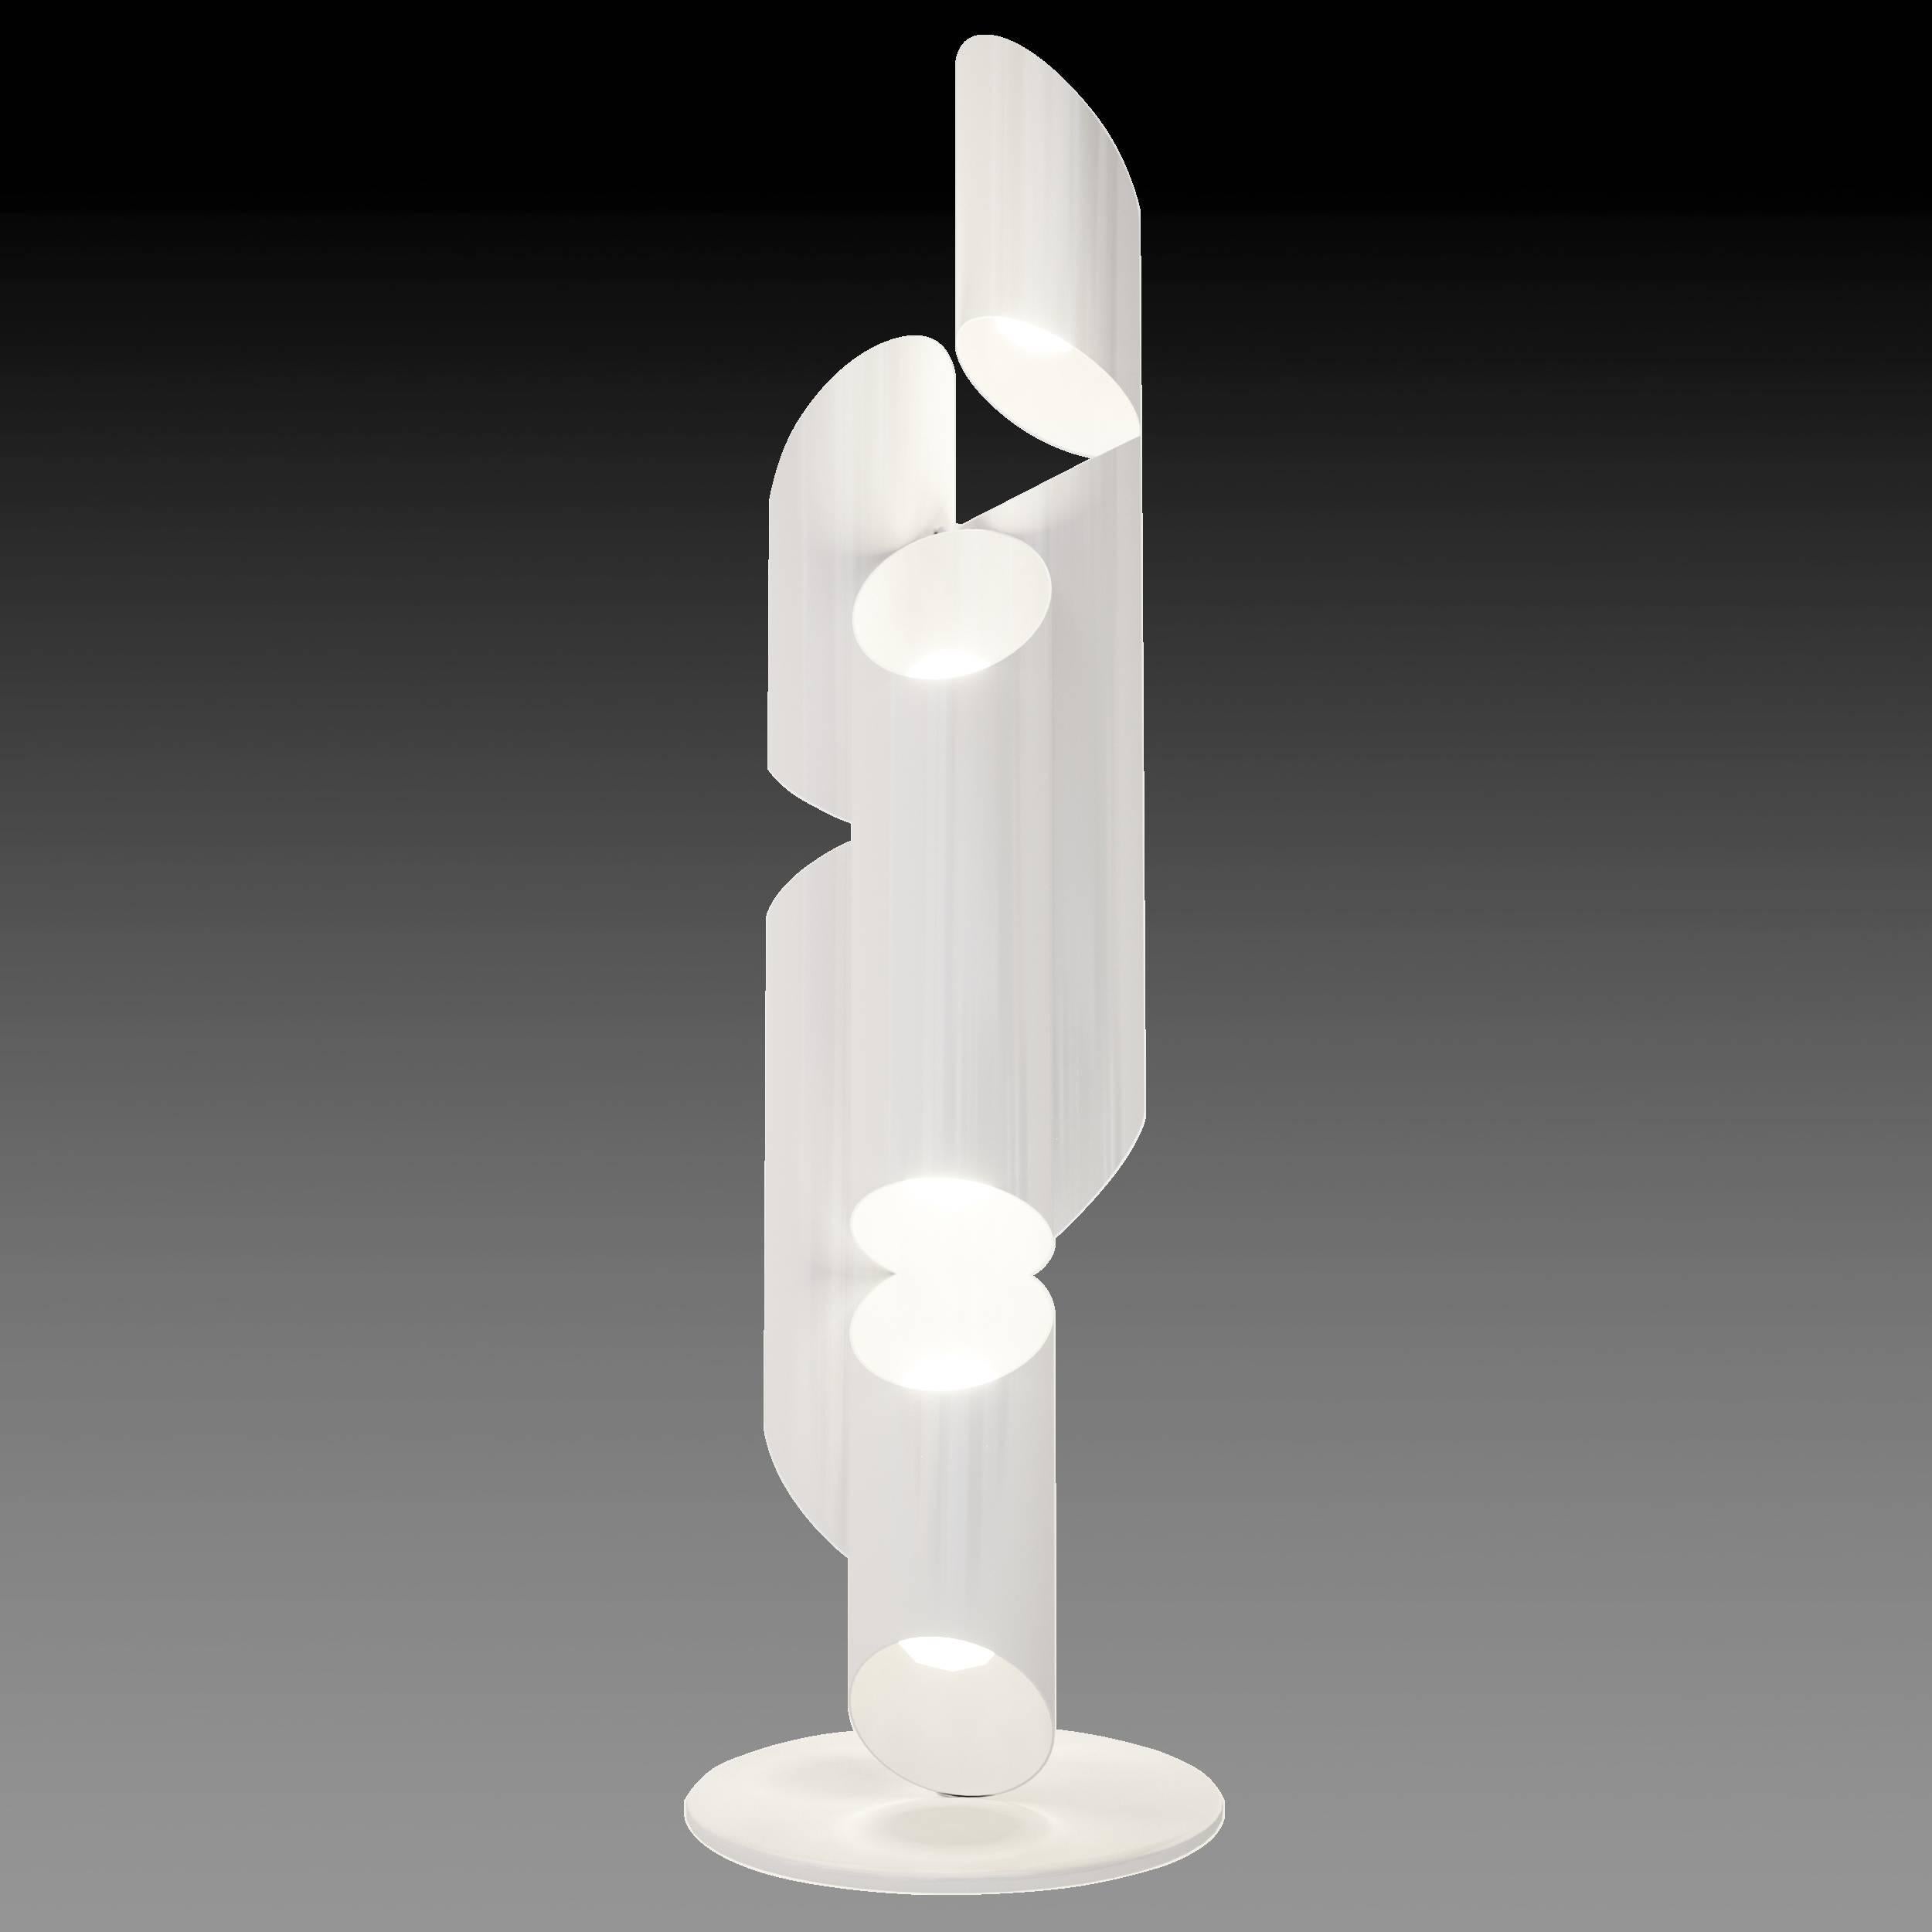 Inspired by church organ pipes, this seven-foot sculptural floor lamp is fabricated in steel and then powder coated in white (or any other desired color). Incandescent light fills each tube and flows out from strategically placed slits creating a